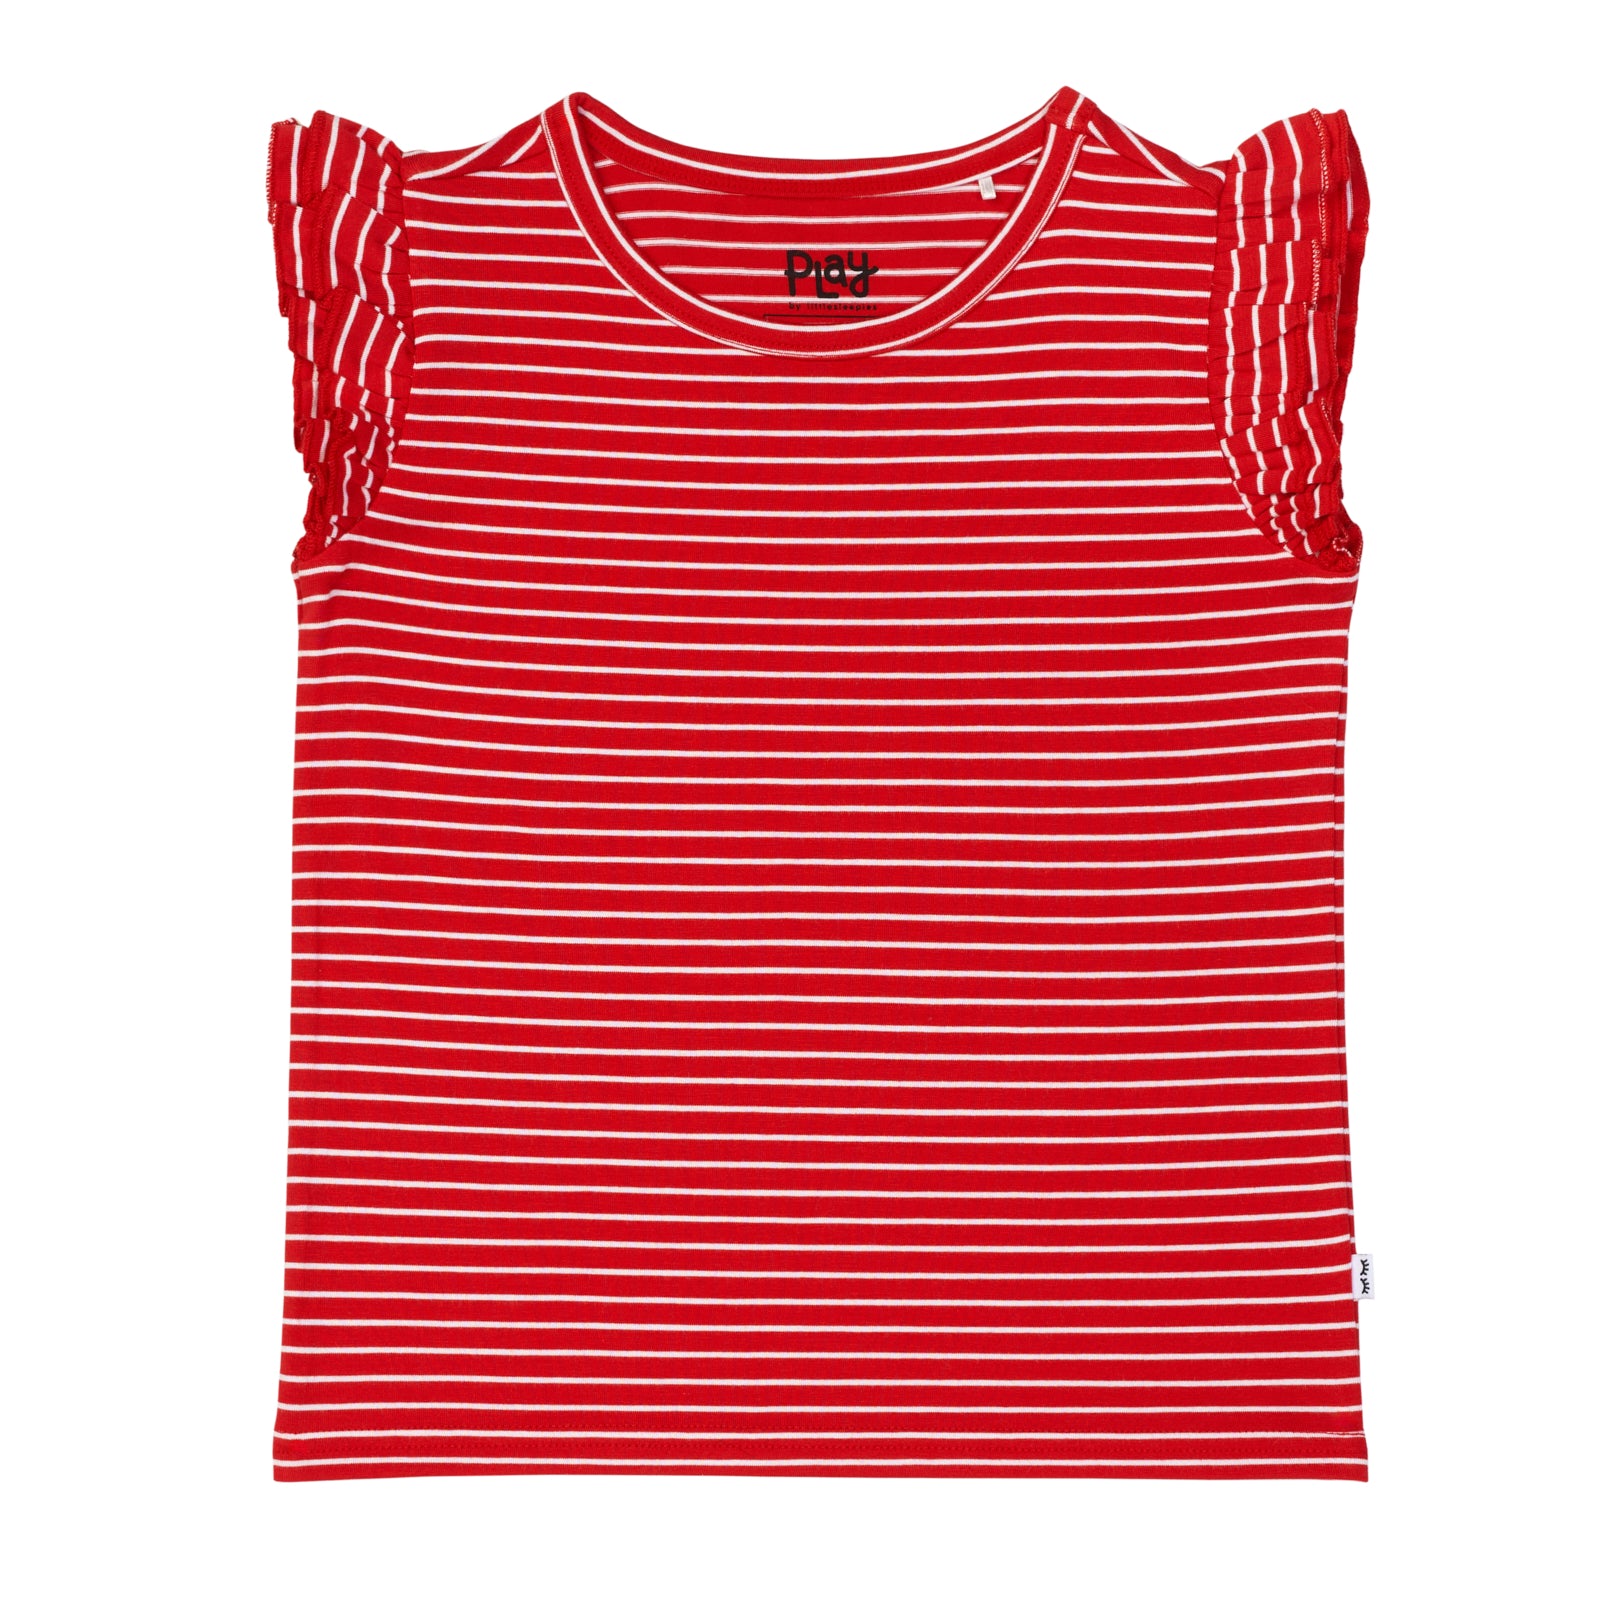 Flat lay image of a Candy Red Stripes flutter tee